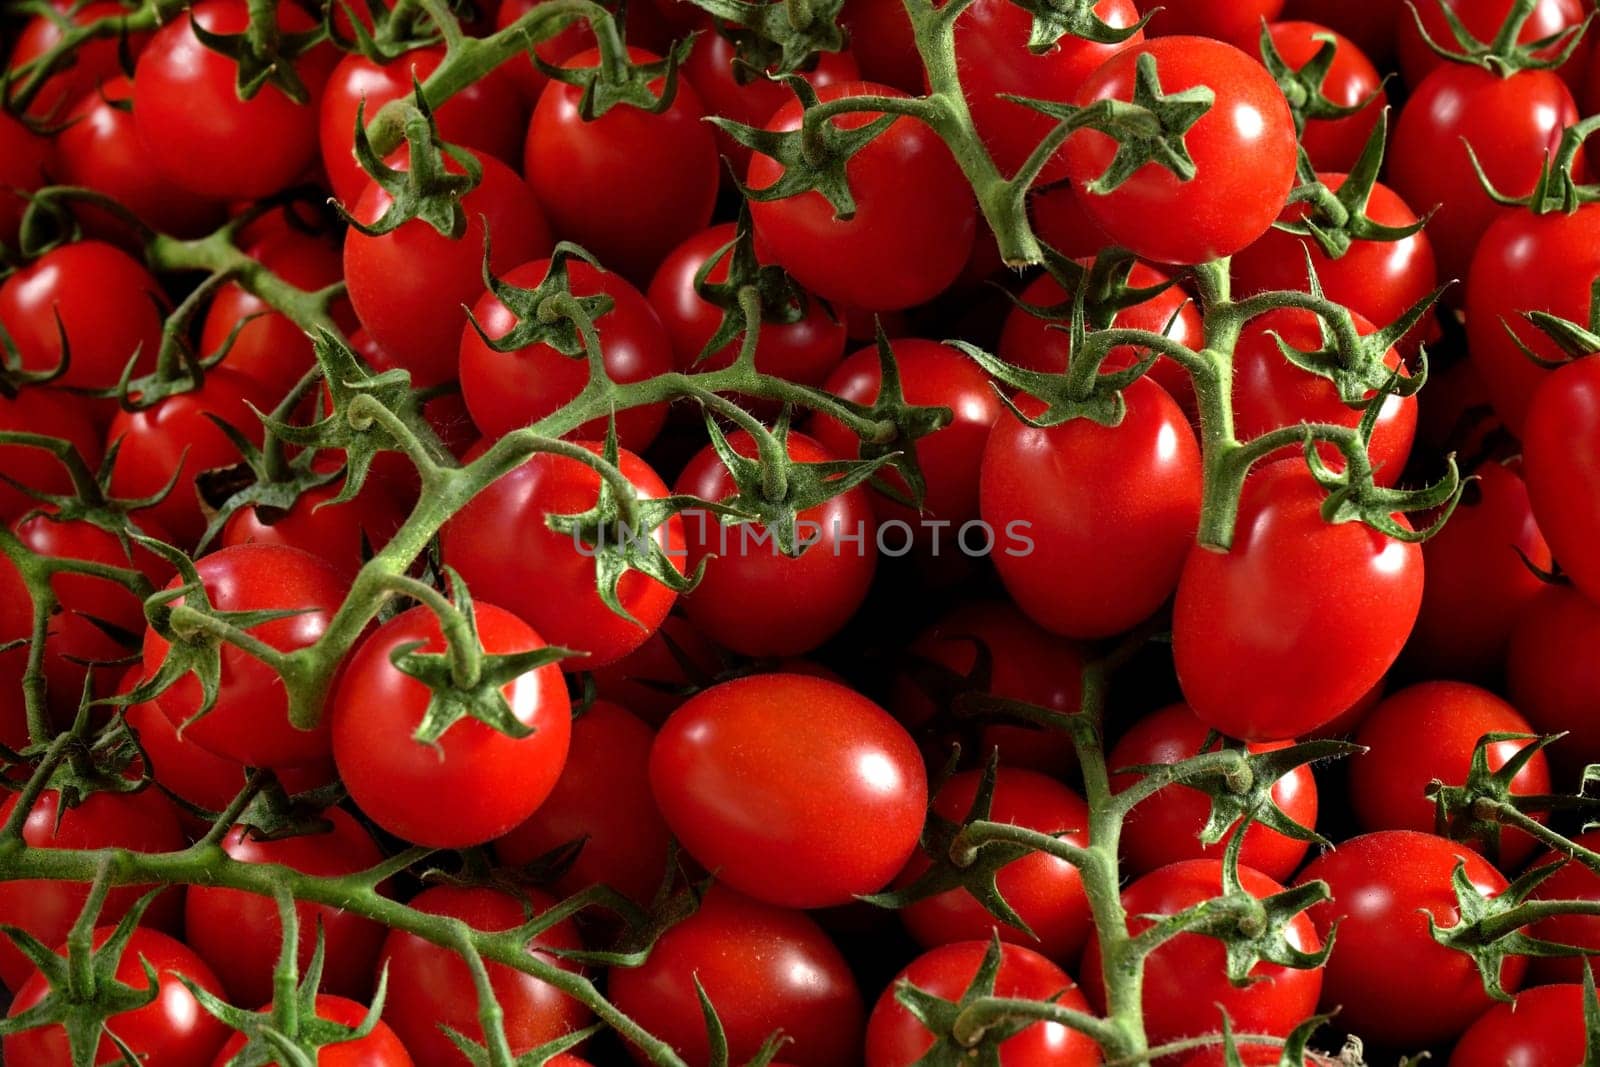 Pile of fresh shiny red ripe tomatoes with green vines by Ivanko